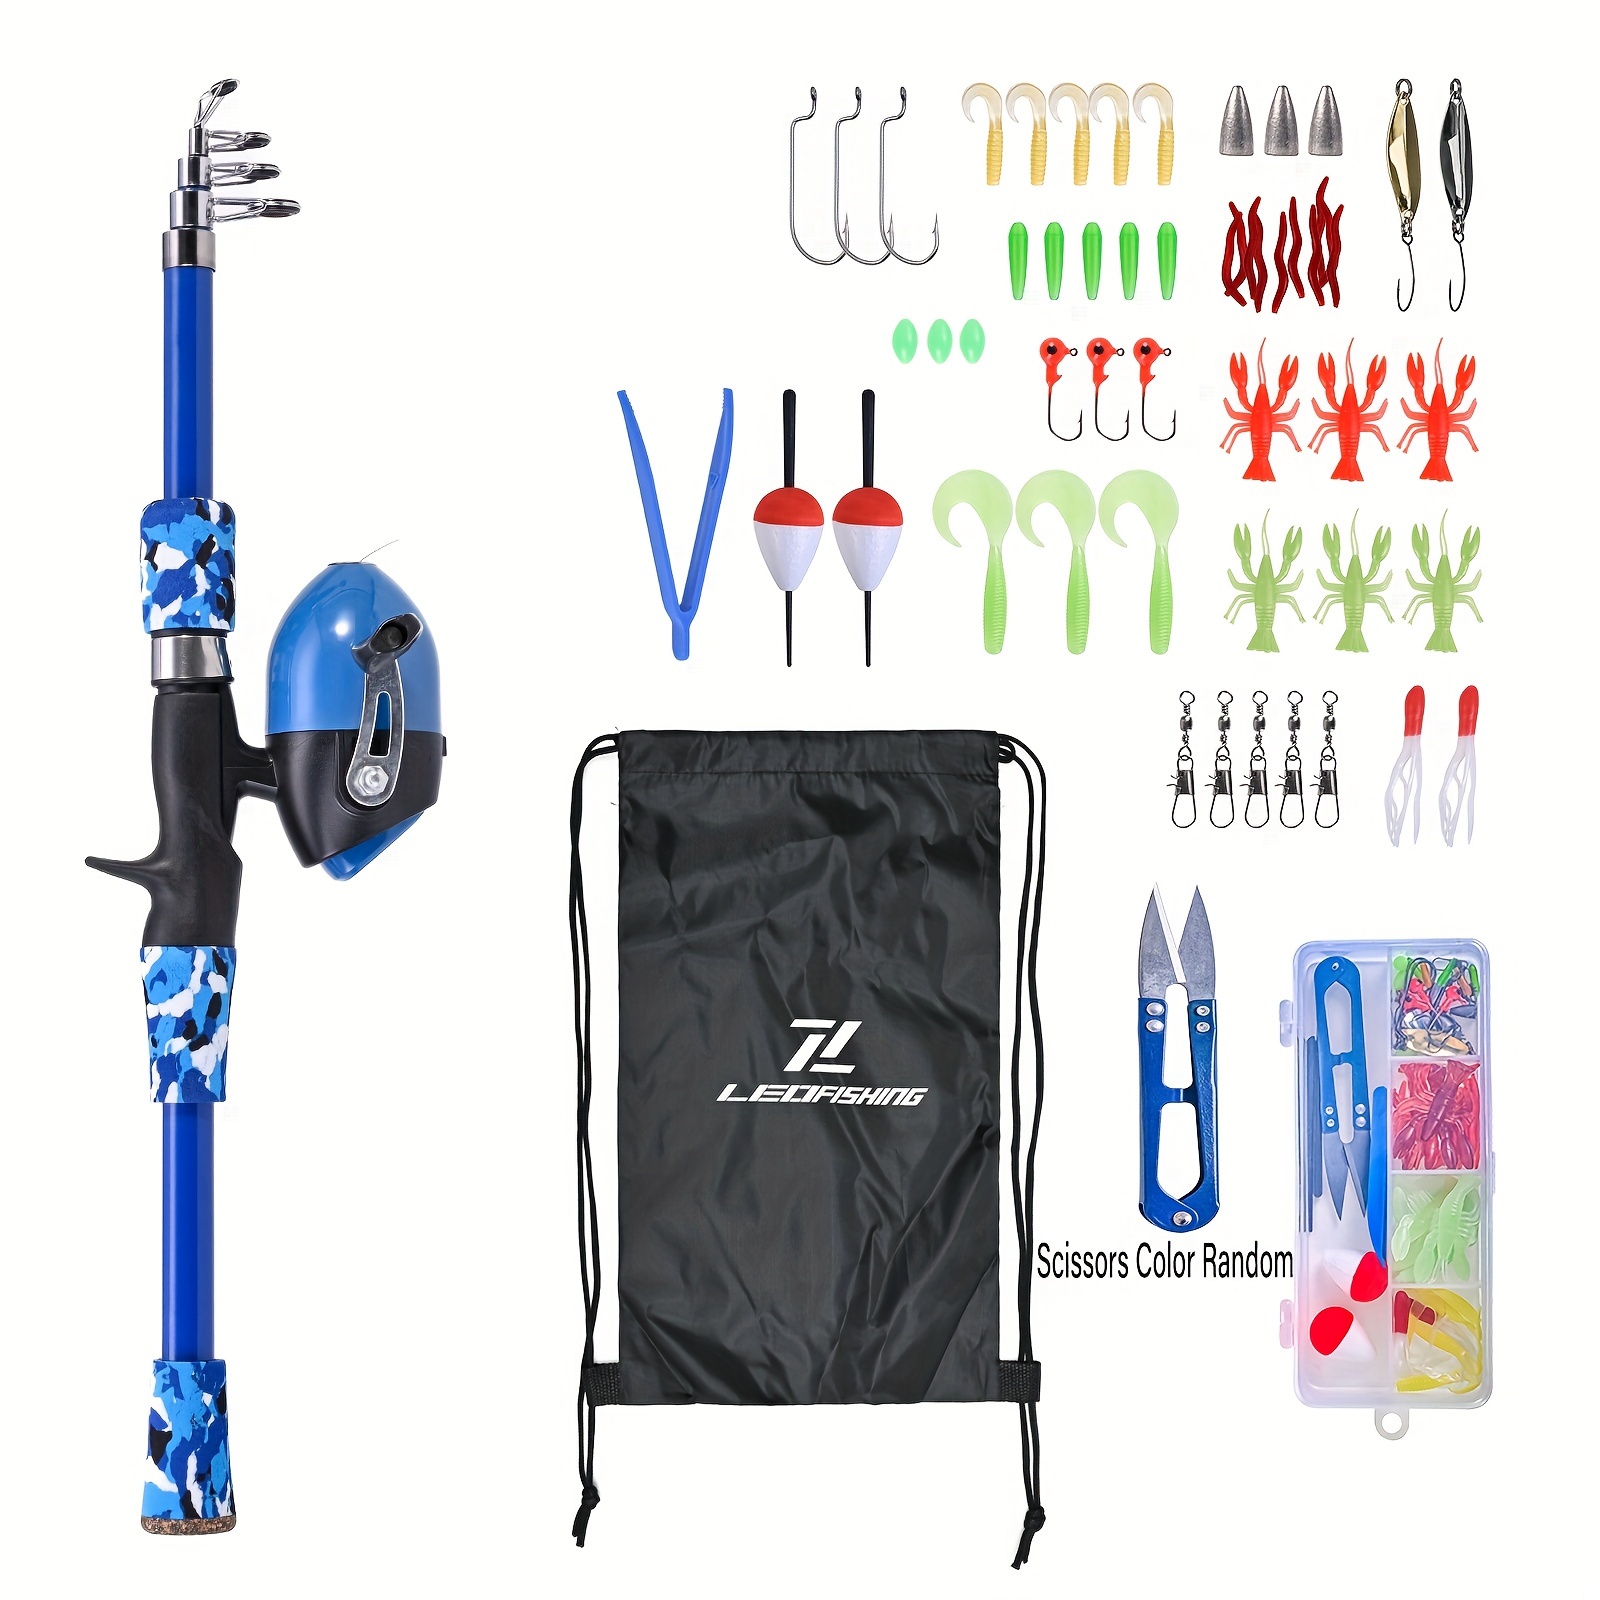 Portable Fishing Rod Set, Telescopic Fishing Rod And Reel Lure Case Kits  With Carry Bag For Youth Fishing And Beginner, 165cm/5.41ft